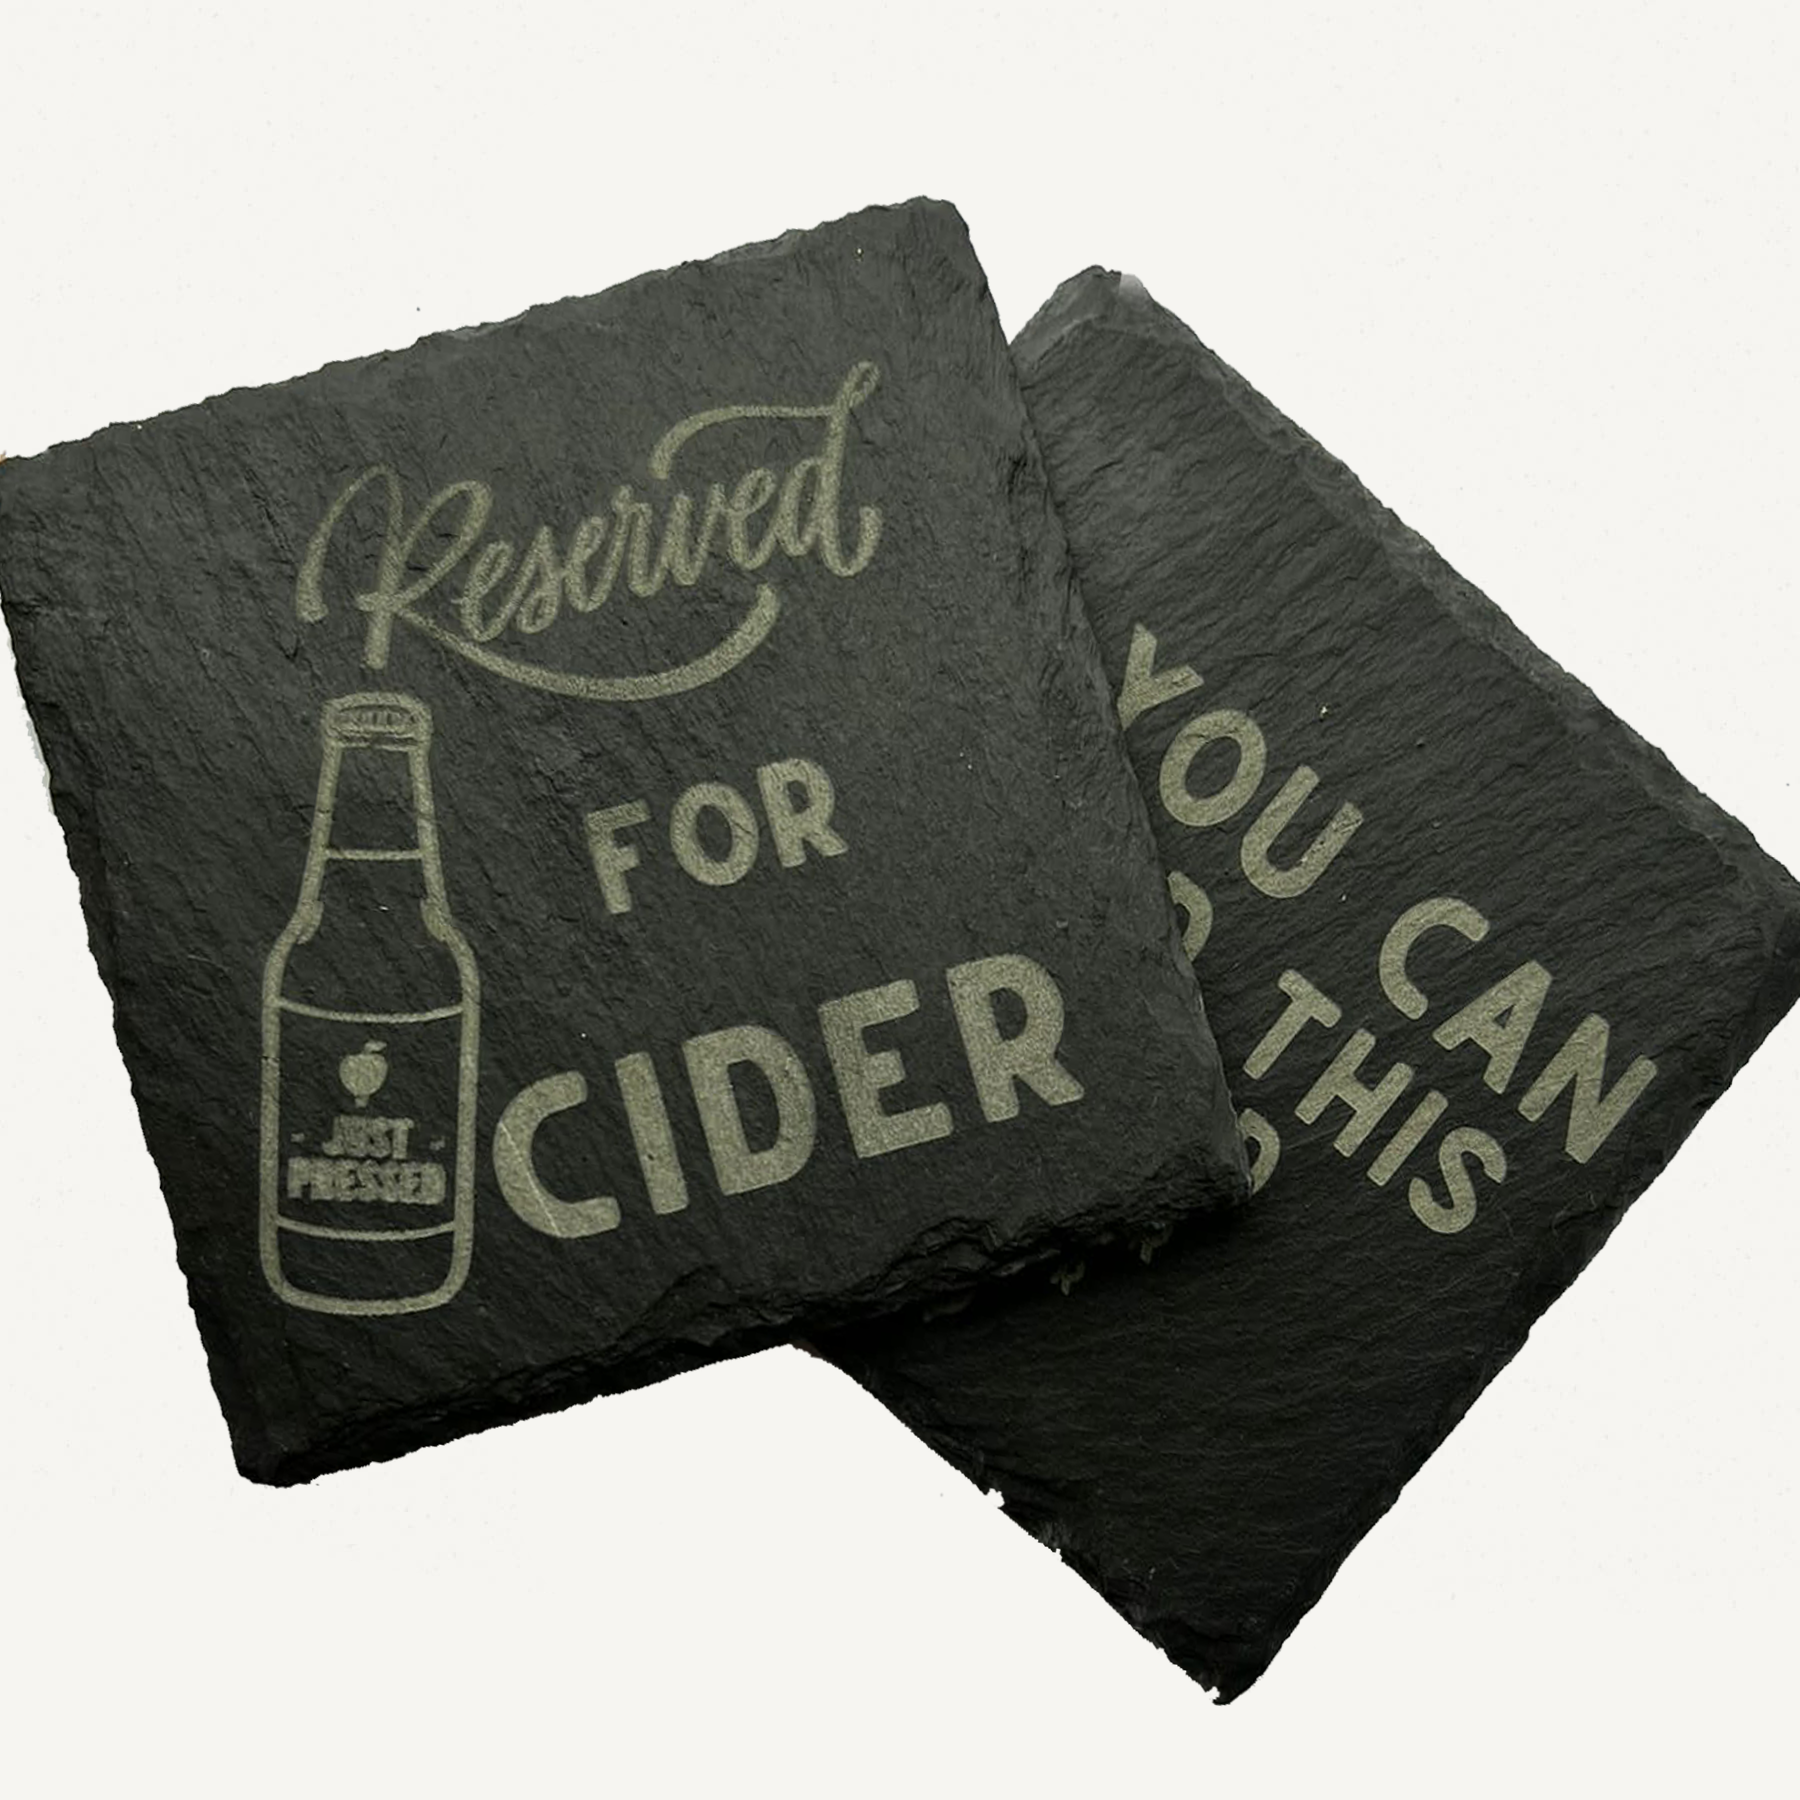 &#39;Need Another JP Cider&#39; Slate Coaster x 2